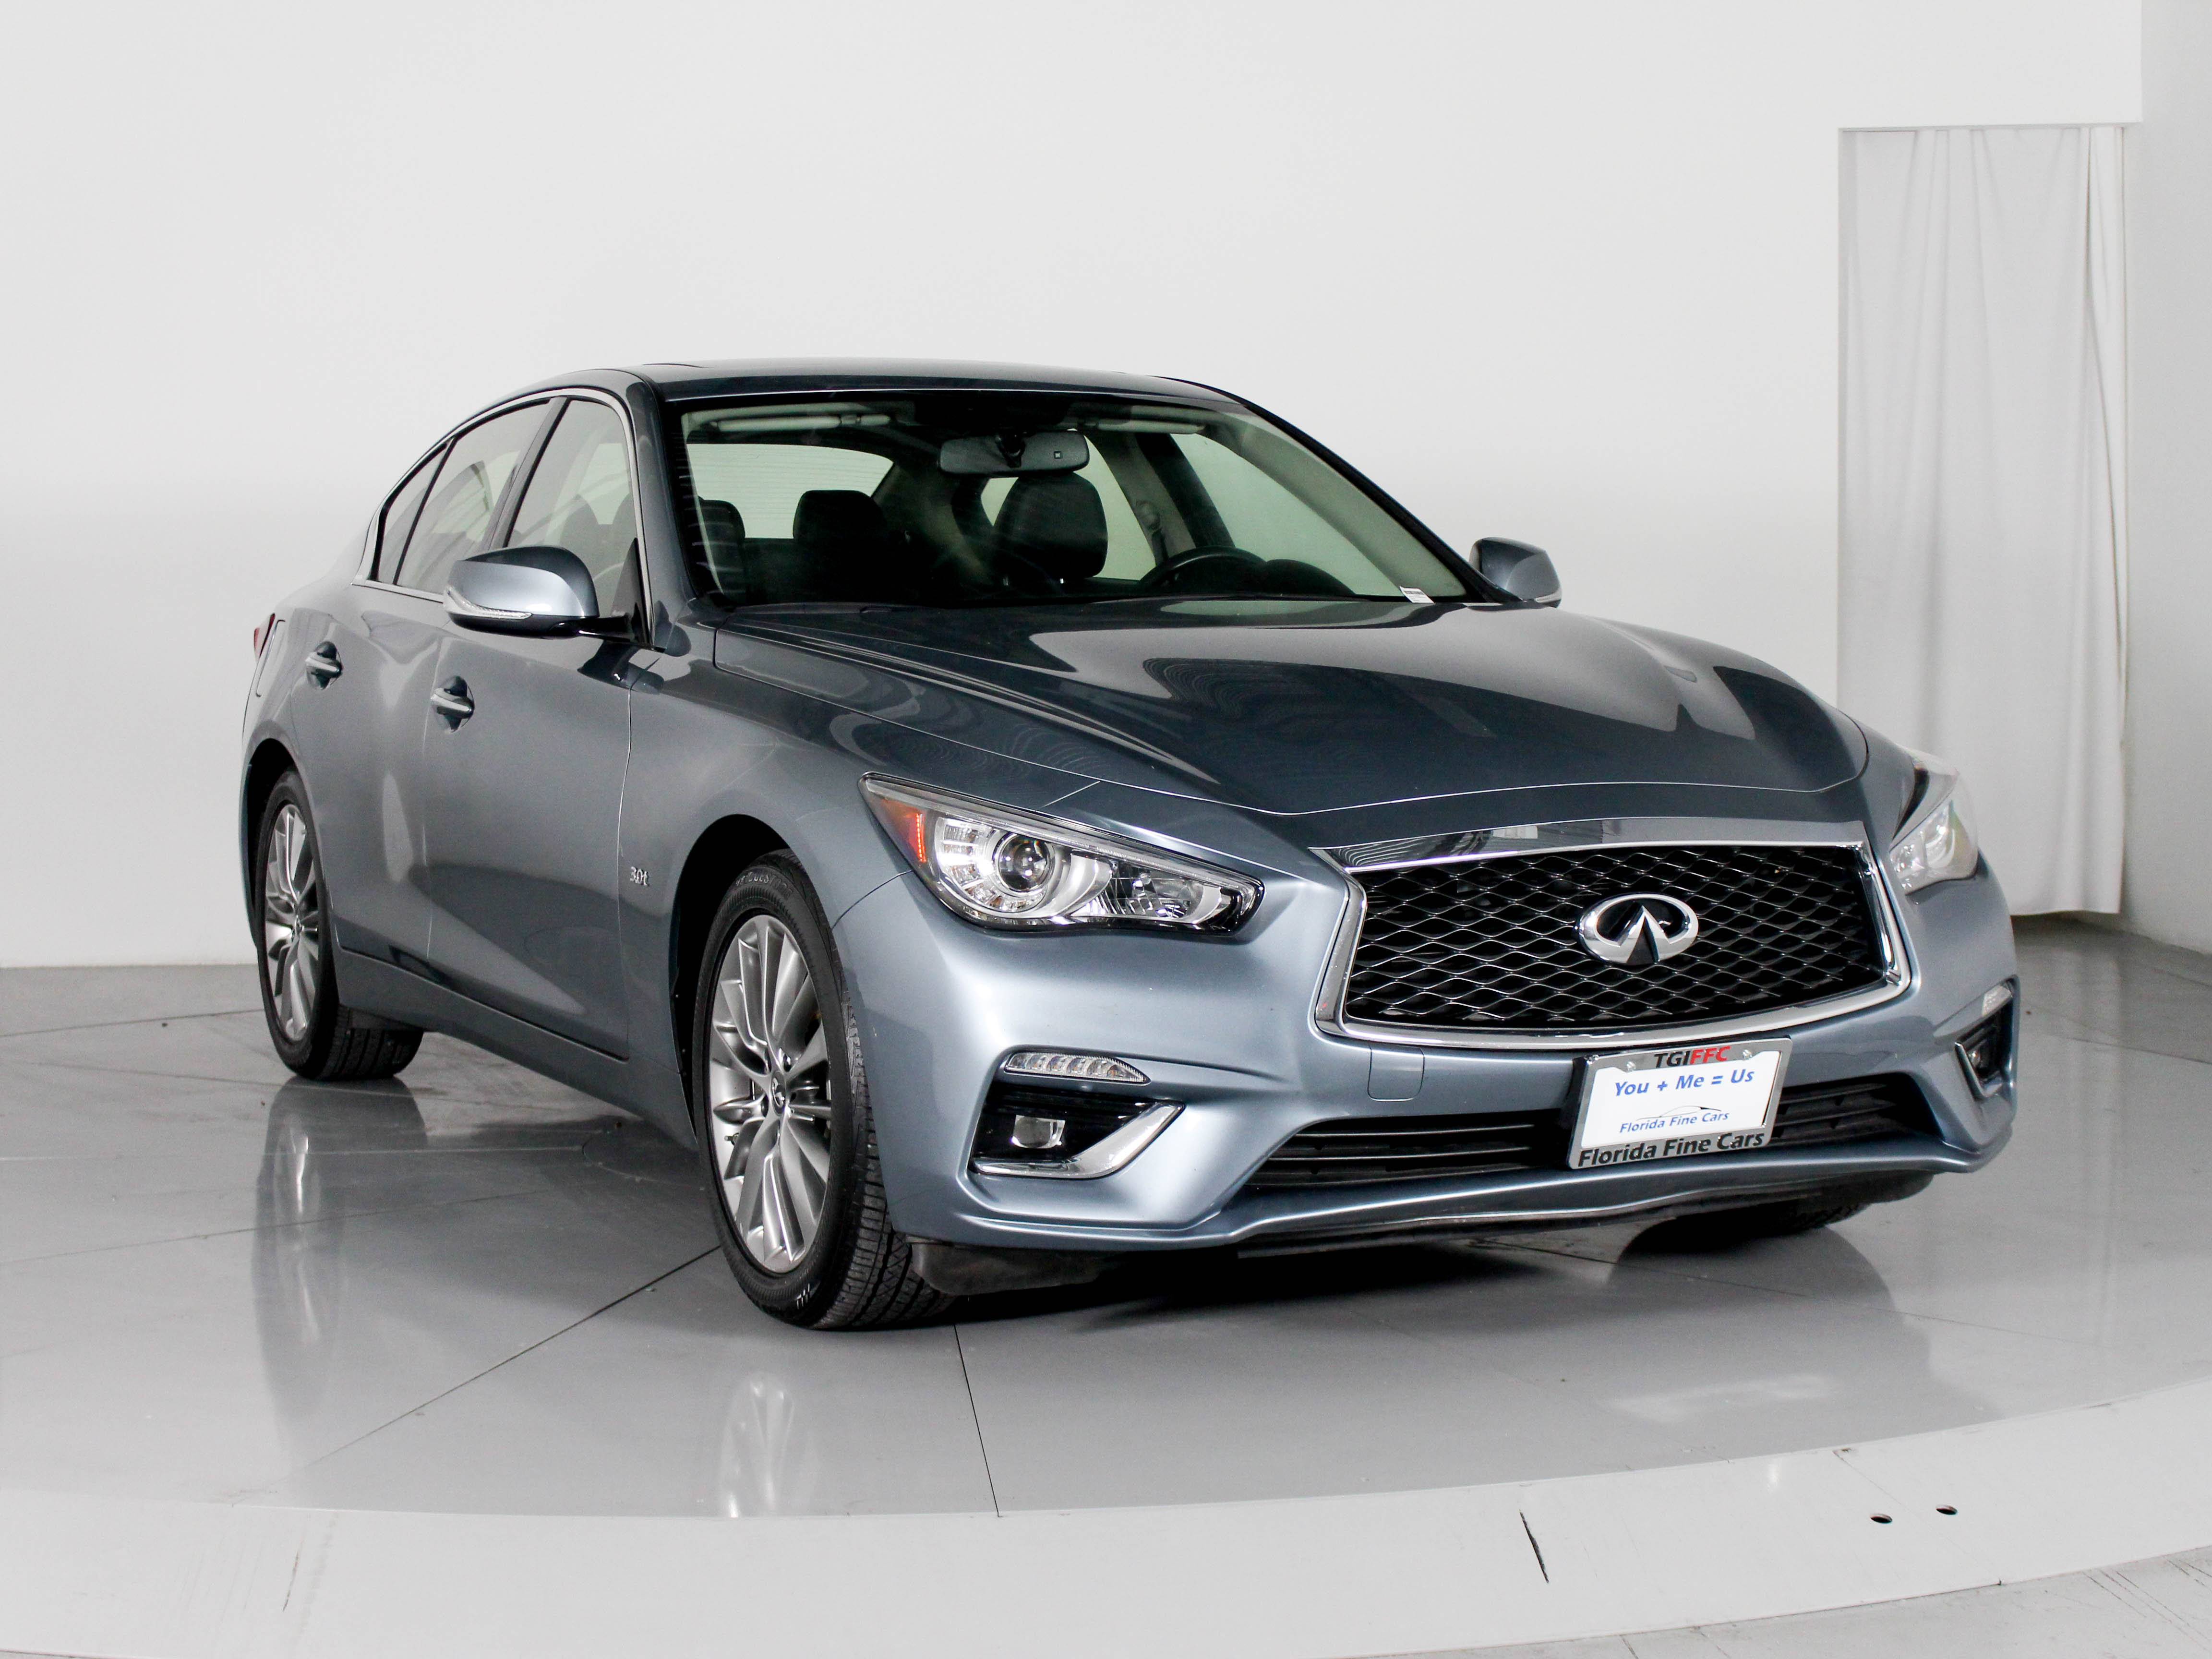 Florida Fine Cars - Used INFINITI Q50 2018 MARGATE 3.0t Luxe